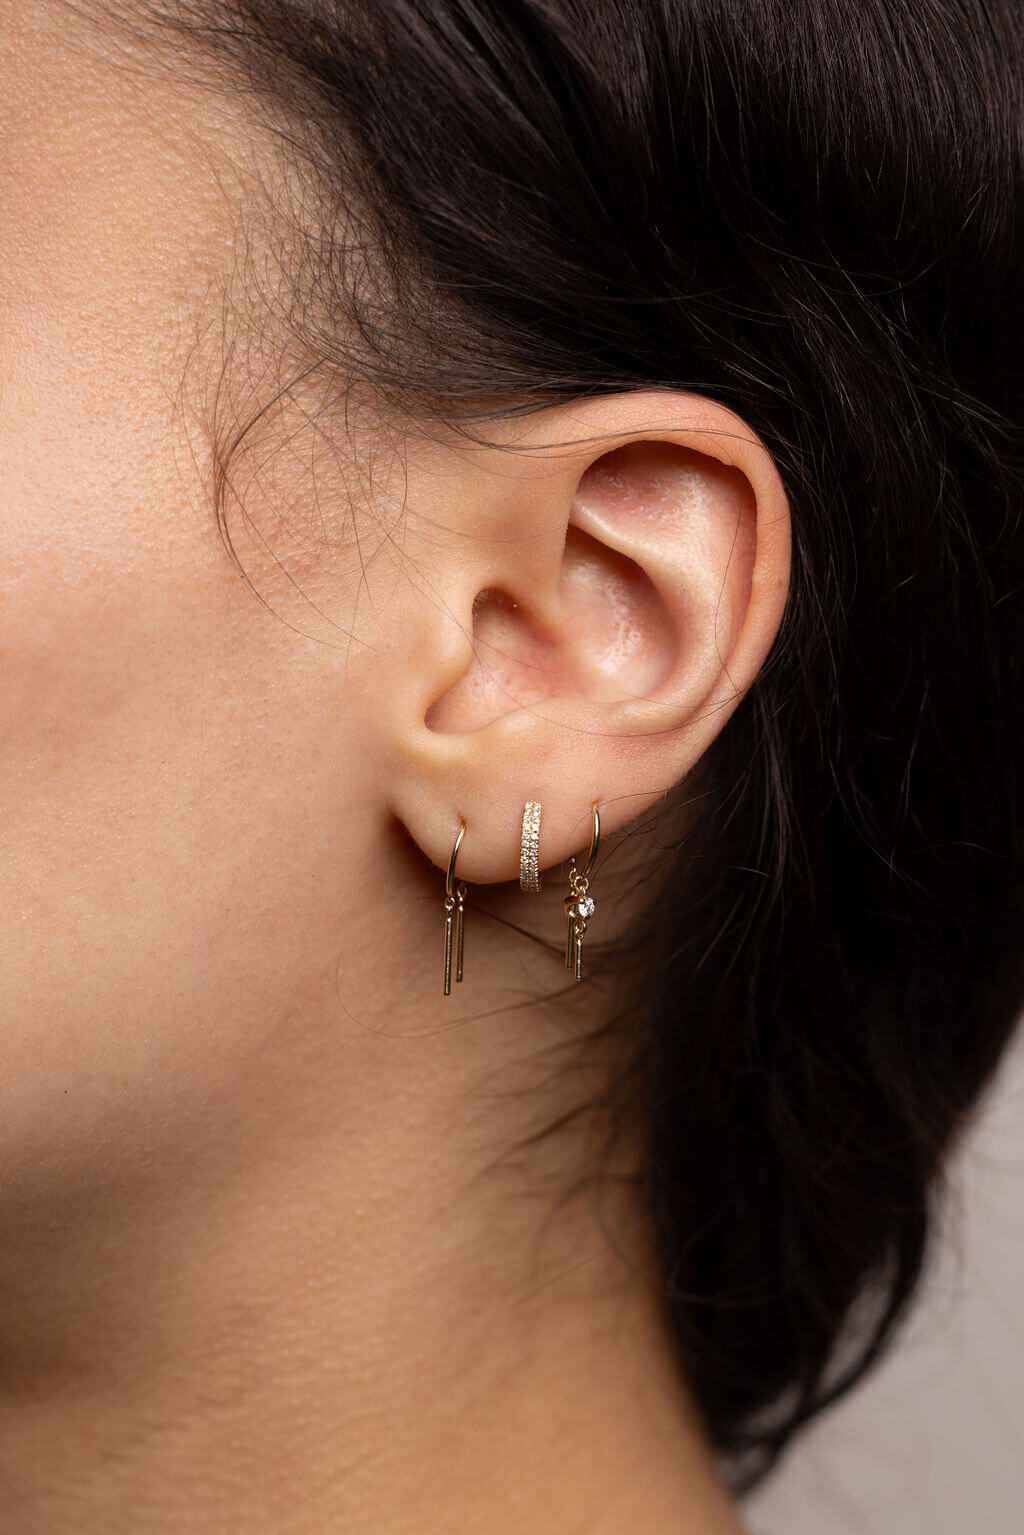 3 Different Sets of Huggies Earrings on Ear - All available at Moondance Jewelry Gallery